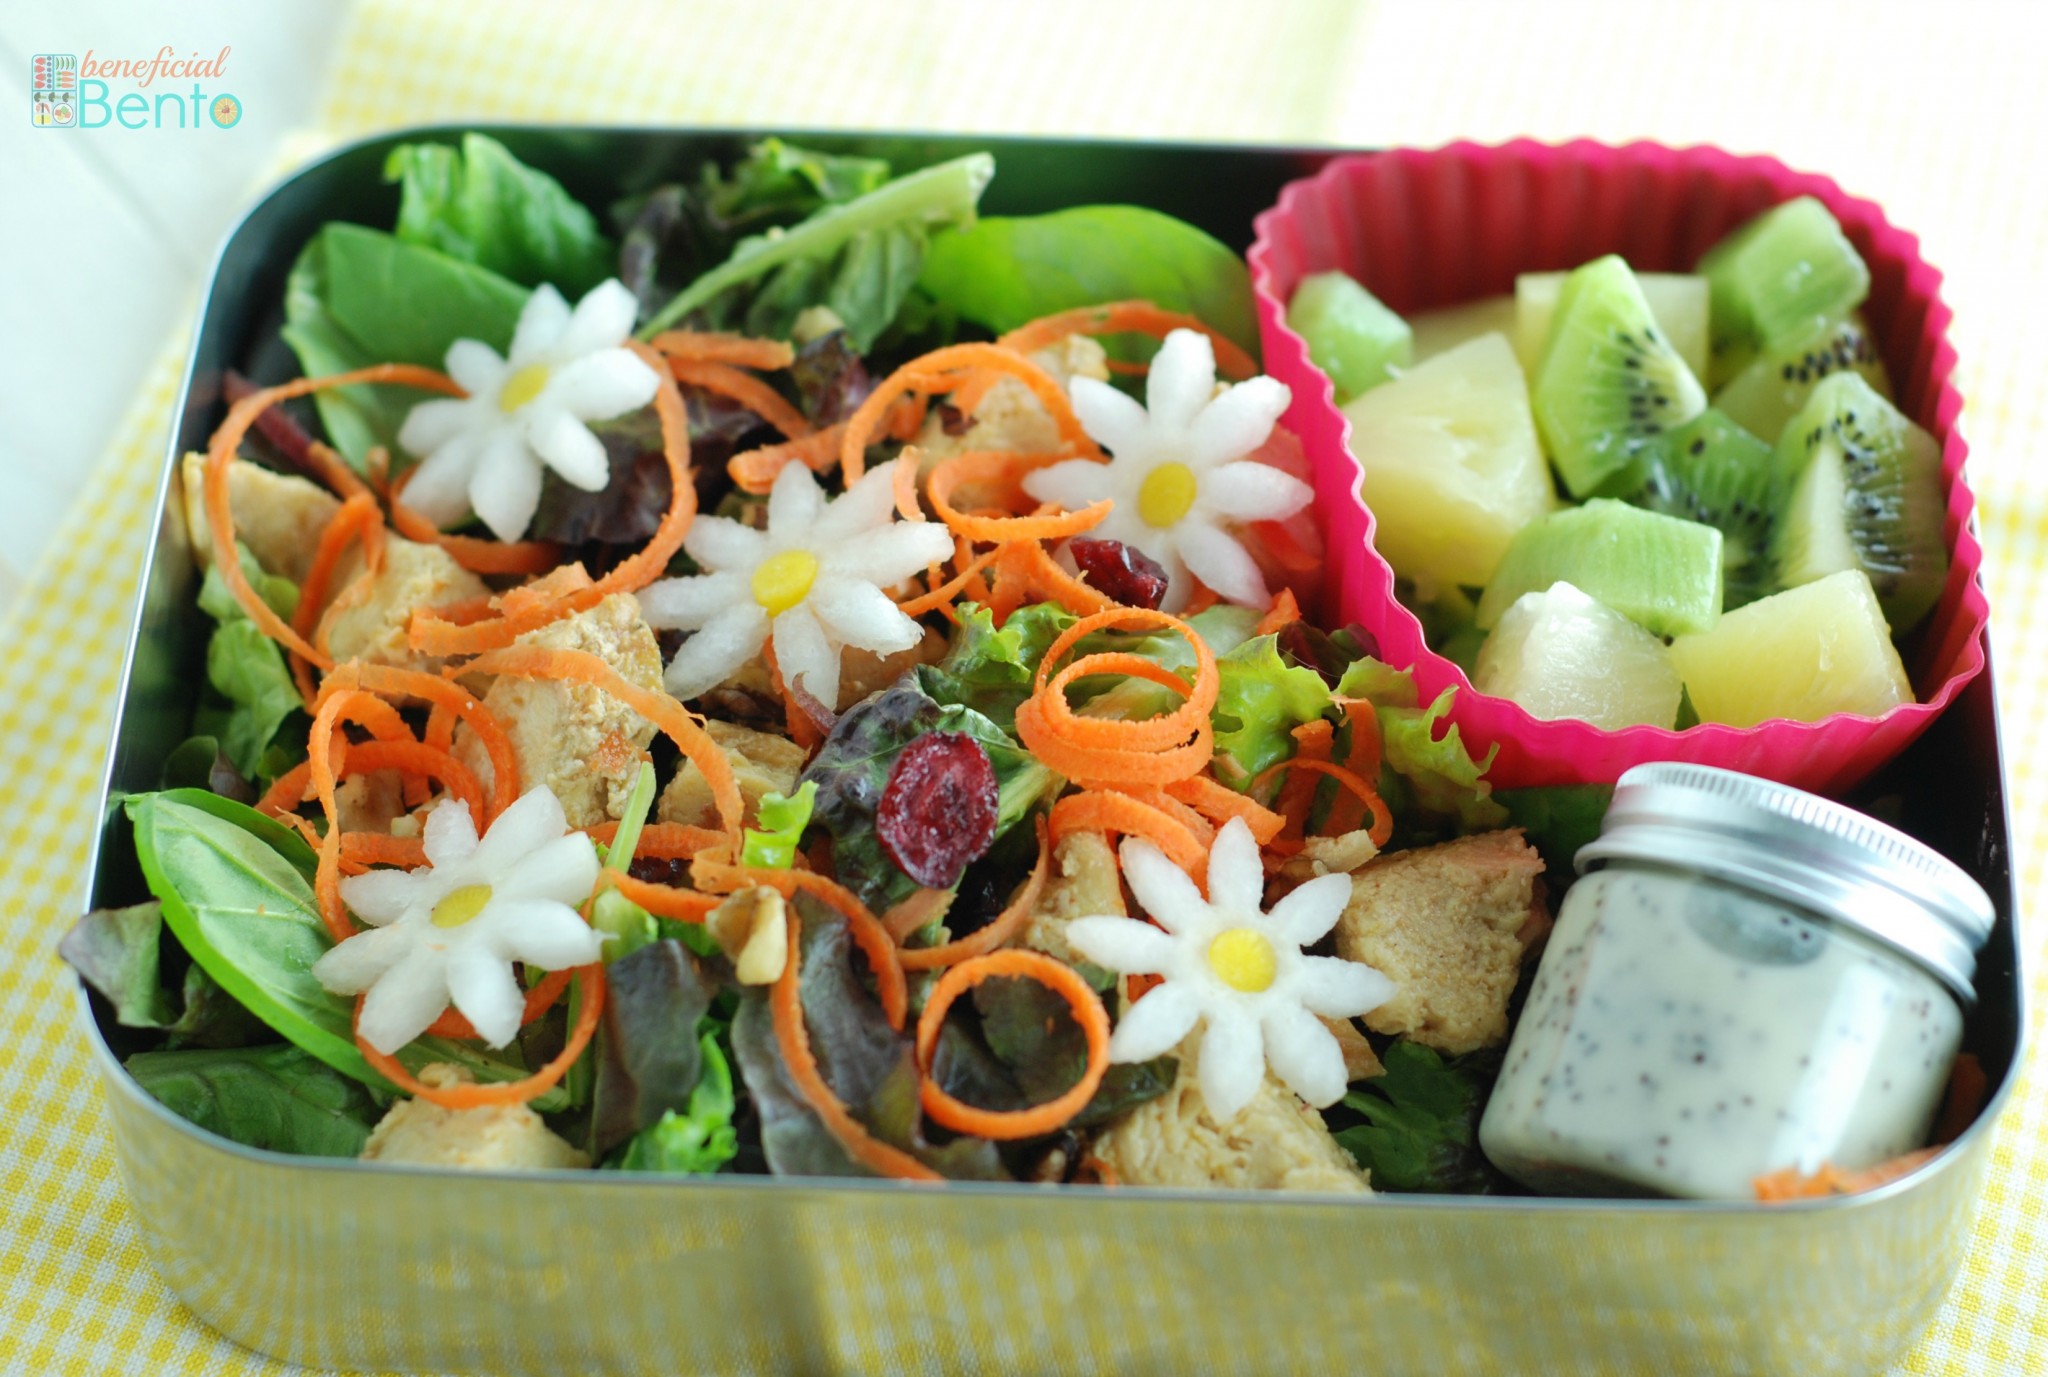 https://static.beneficial-bento.com/uploads/2015/04/Chicken-salad-with-poppy-seed-dressing-daisies.jpg